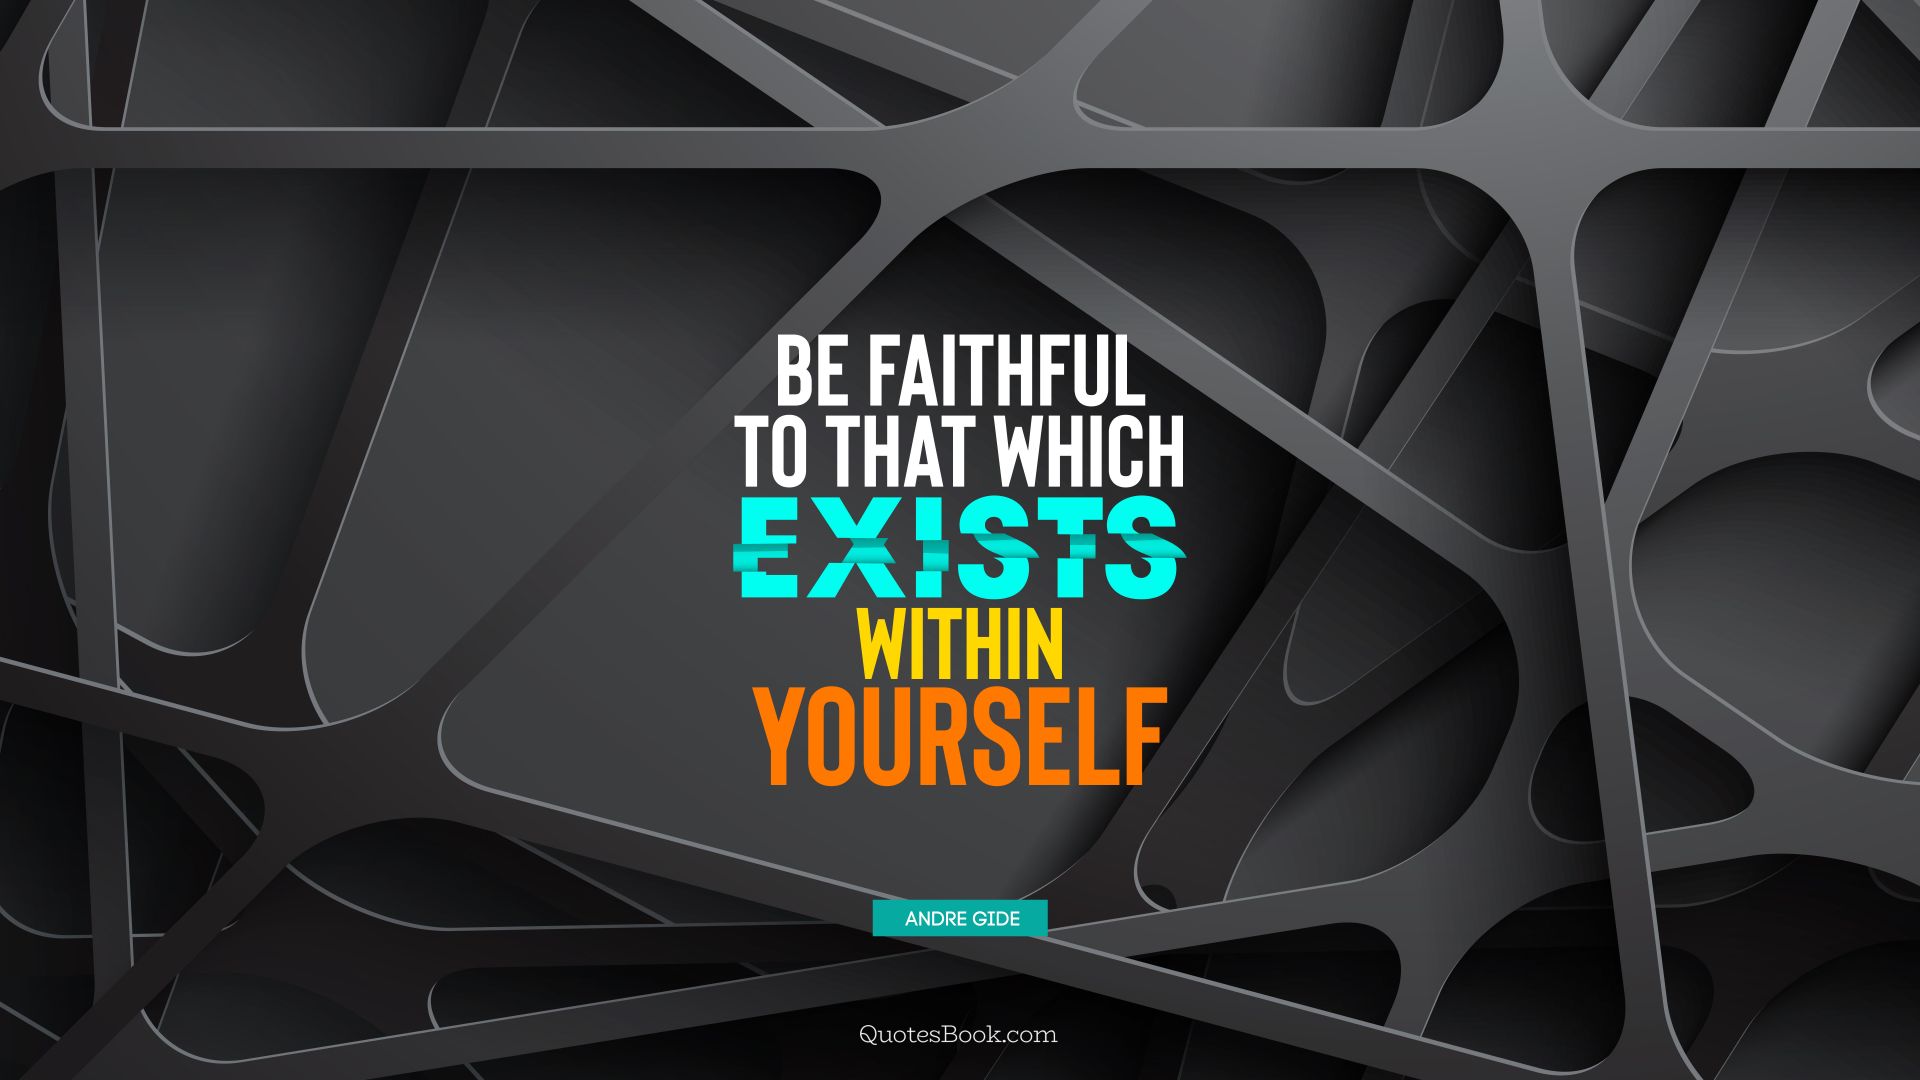 Be faithful to that which exists within yourself. - Quote by Andre Gide